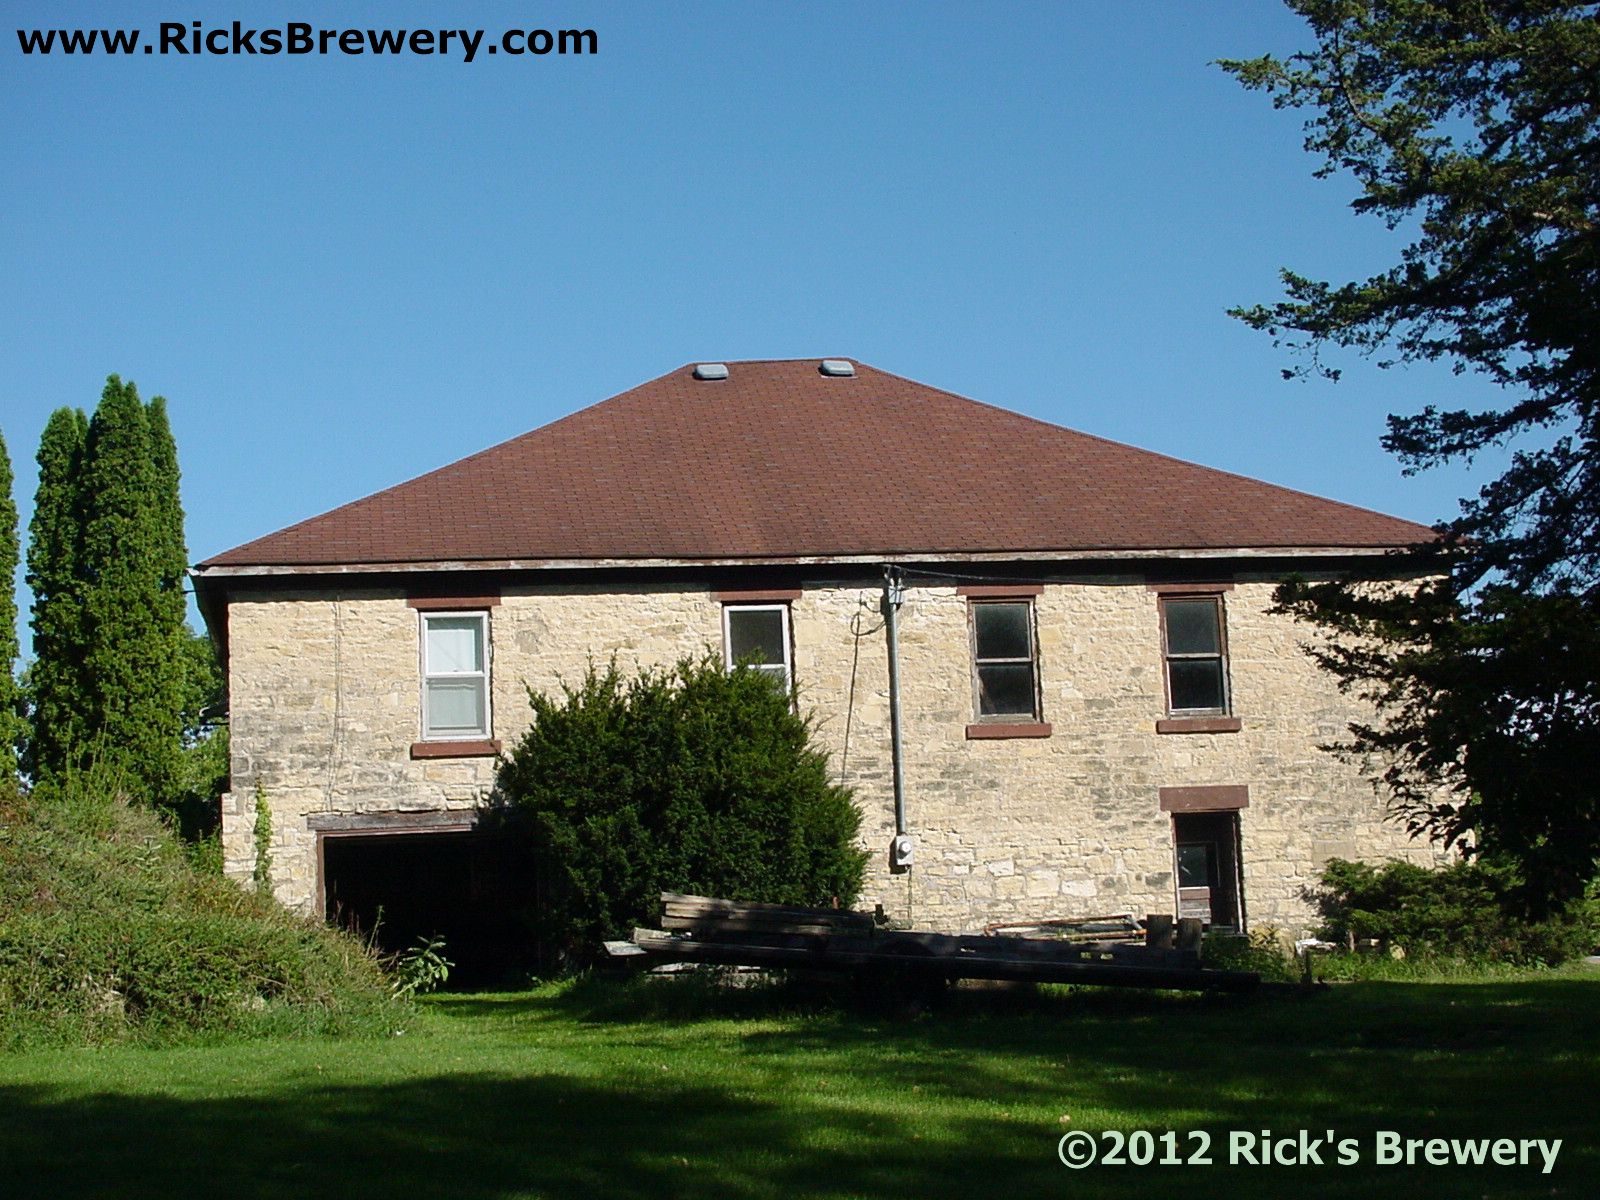 Rick's Brewery view from west